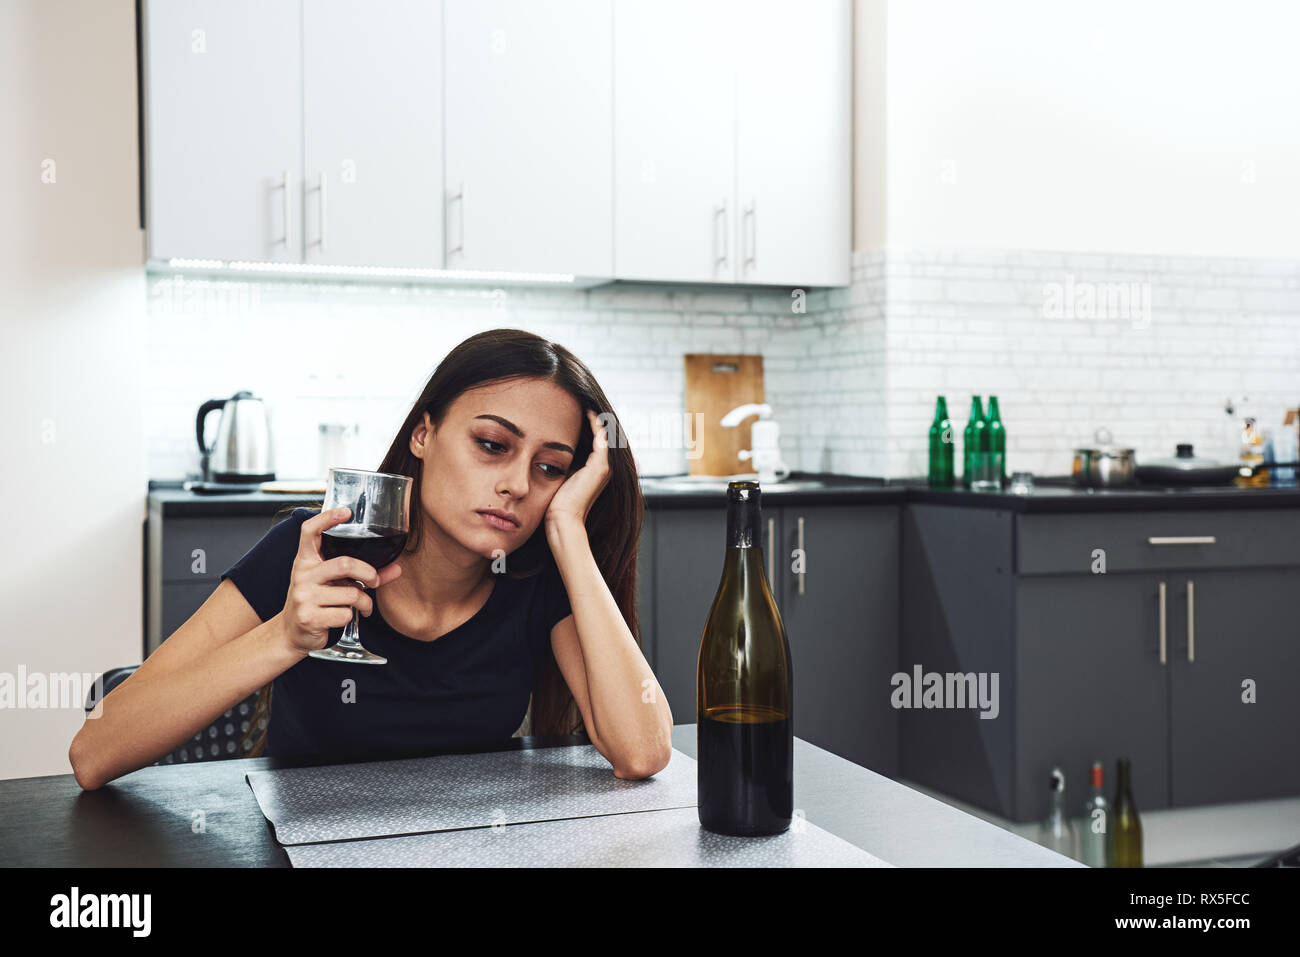 Dark-haired, sad and wasted alcoholic woman sitting at home, in the kitchen, leaning over the table, holding a glass and looking at bottle of red wine Stock Photo